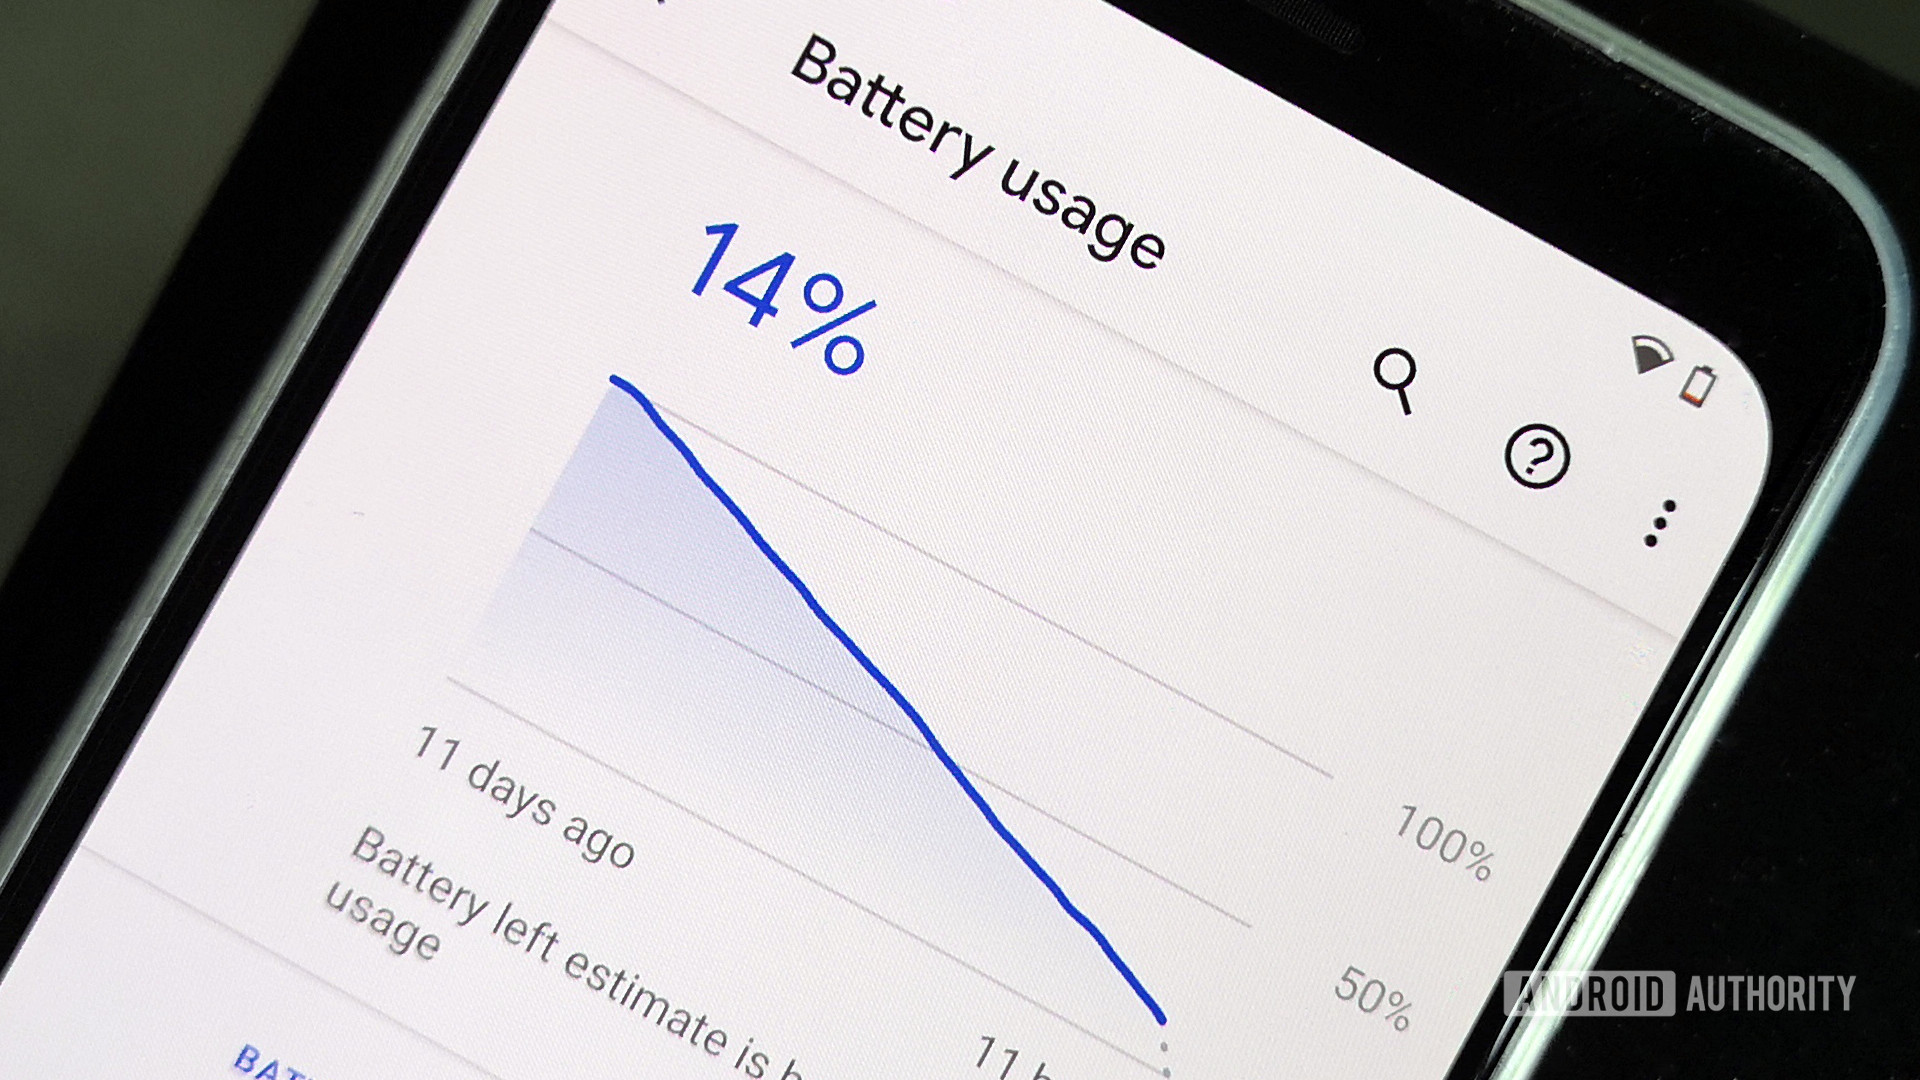 Nylon jeans antwoord Battery life: Guide to everything that affects and drains your phone battery